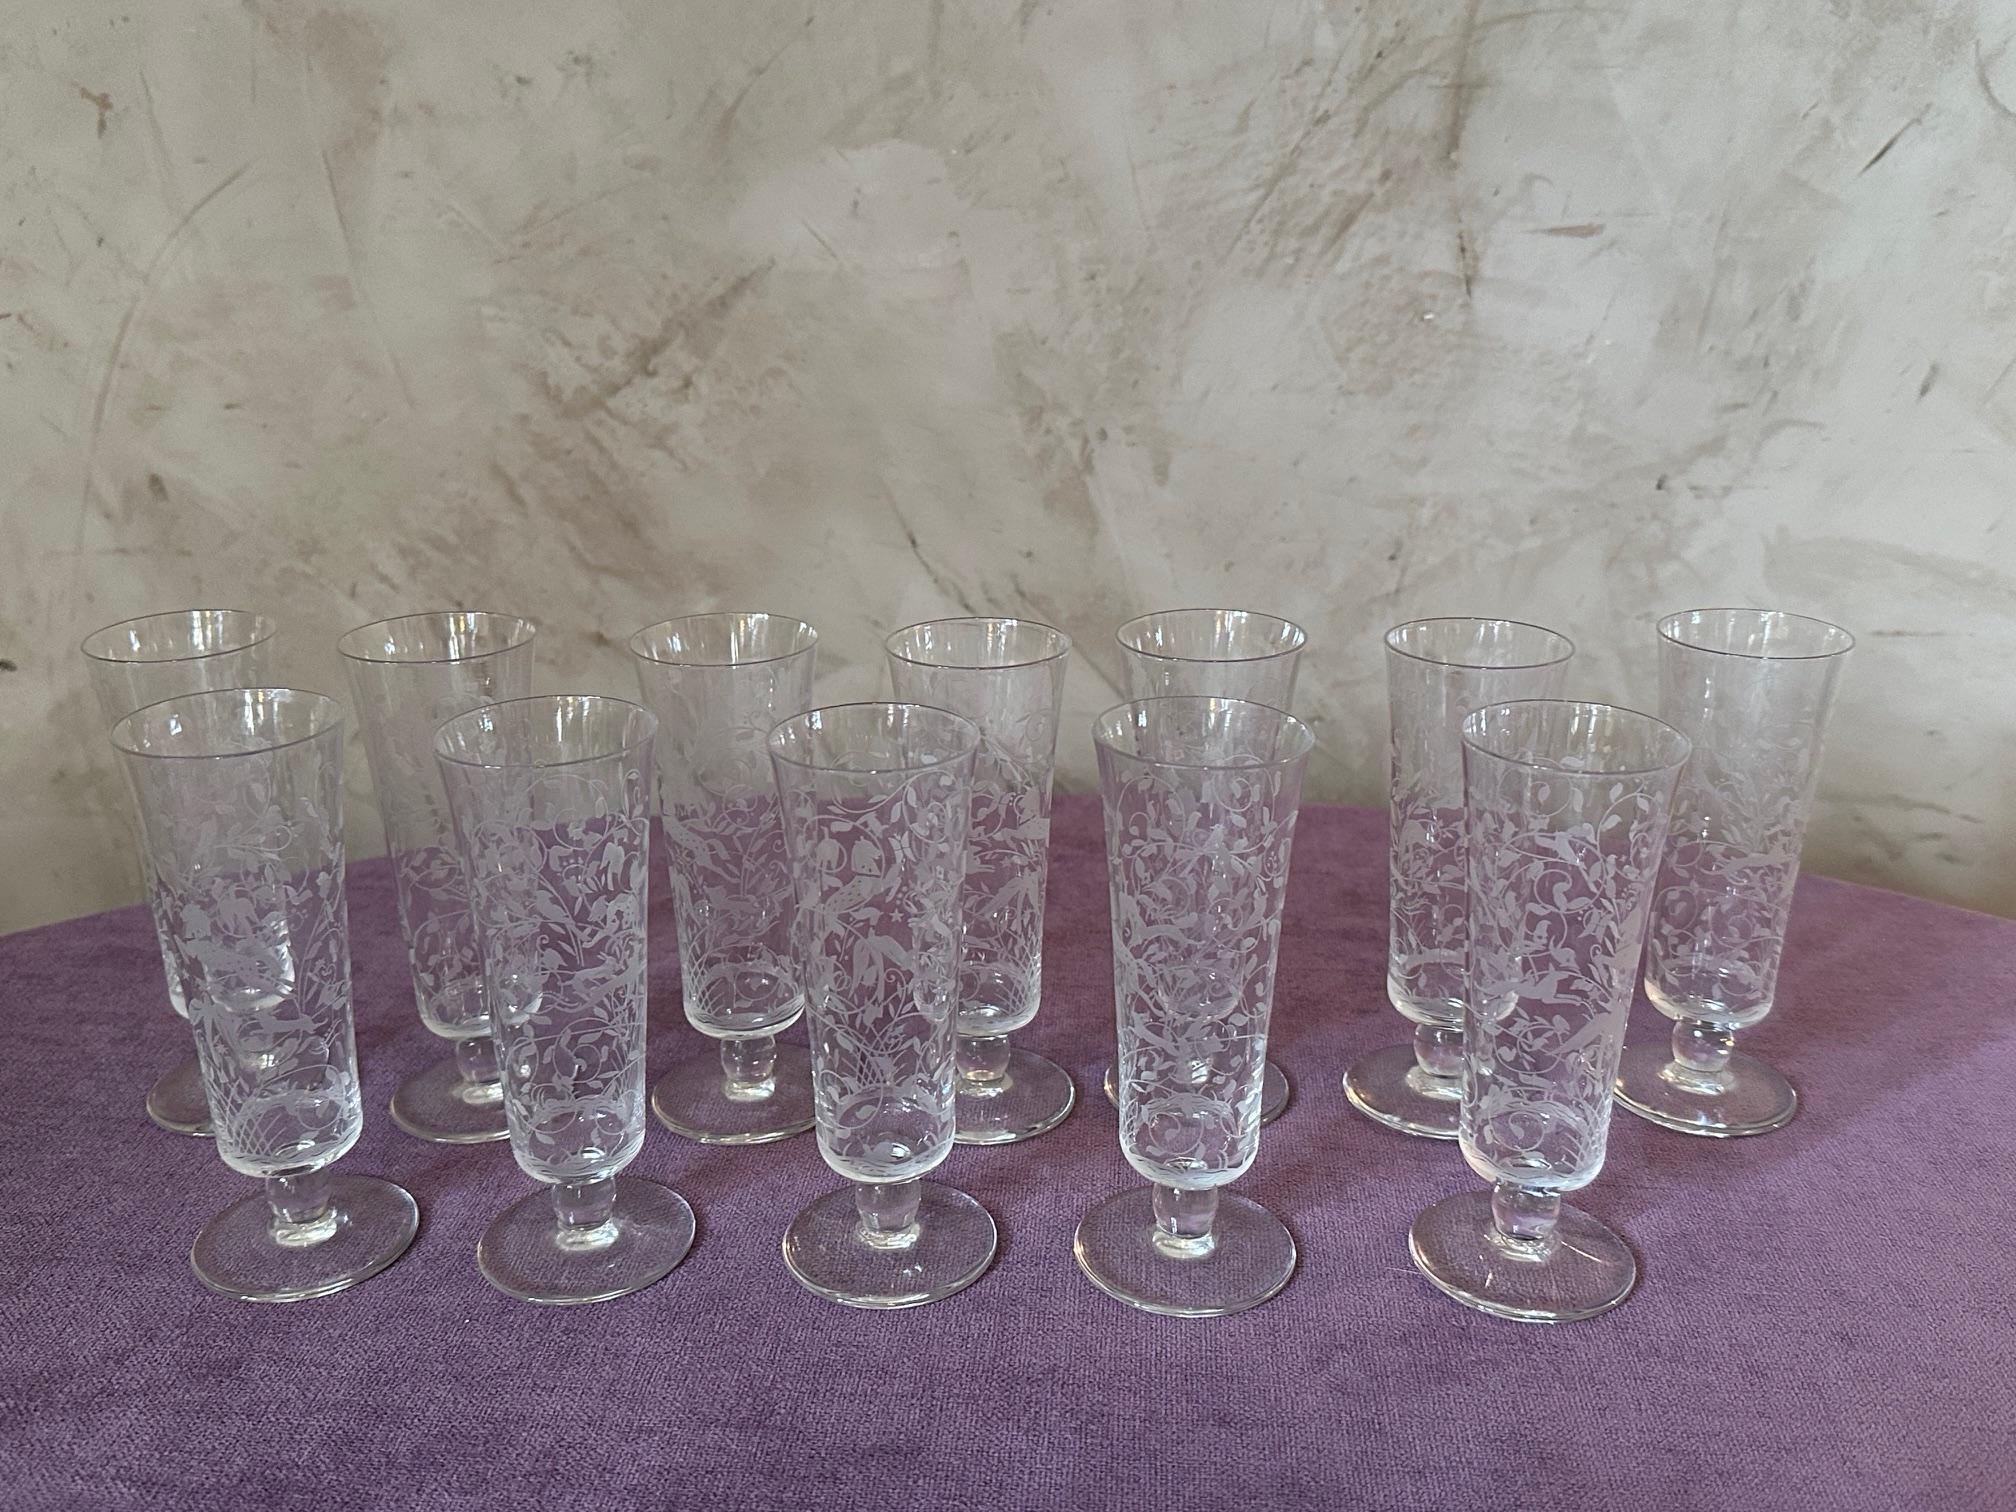 20th century French Set of Crystal Baccarat Glasses, Pitcher and Decanter For Sale 12